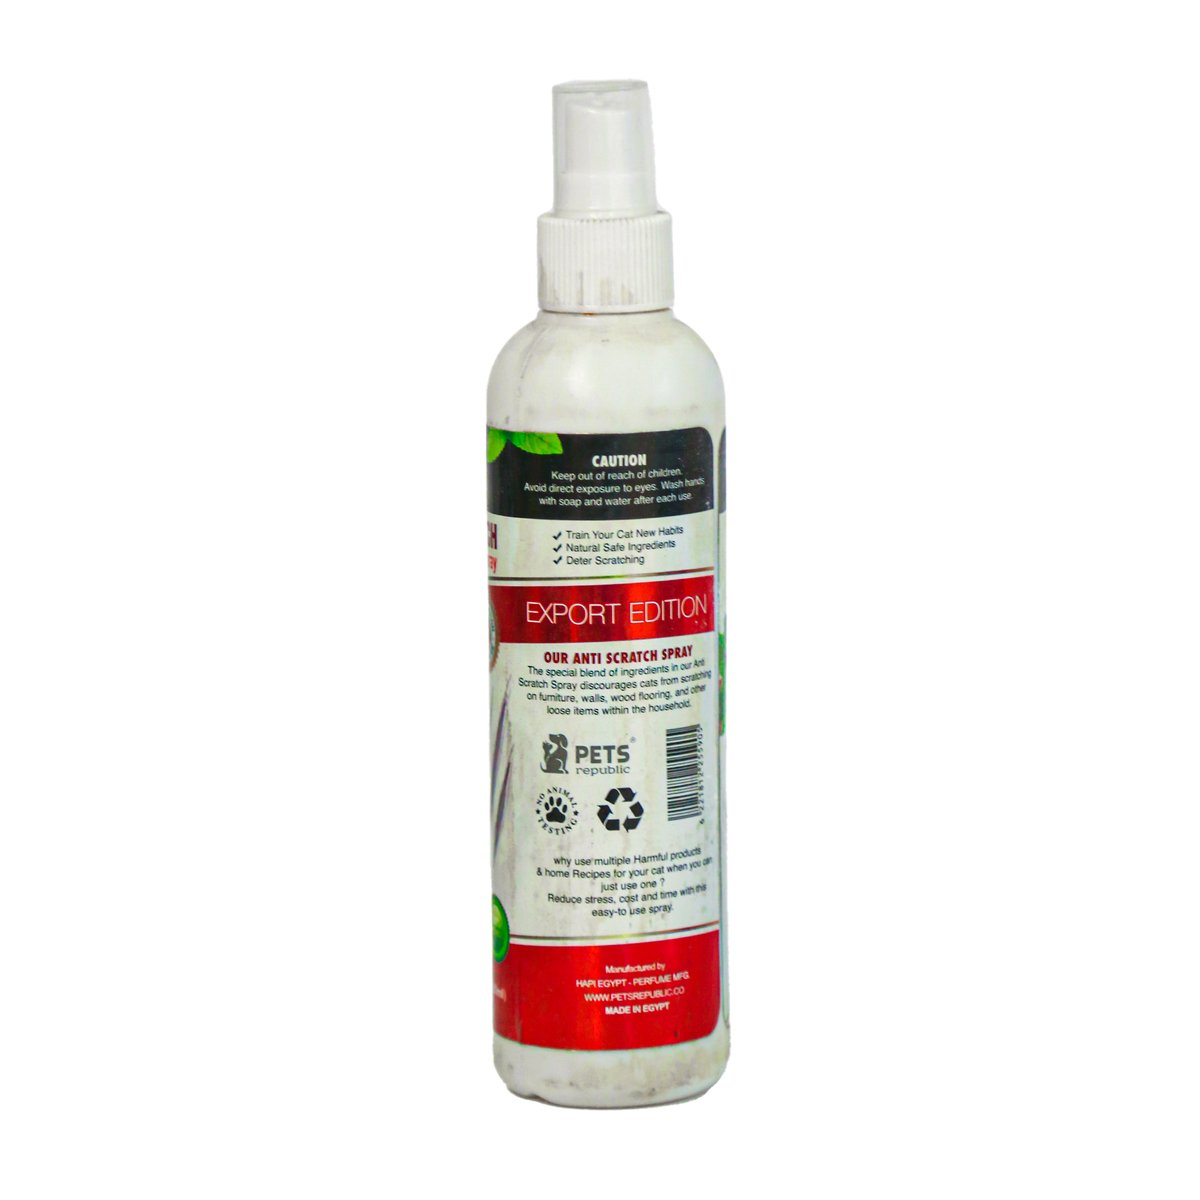 Buy Anti Scratch Spray for your dog or cat